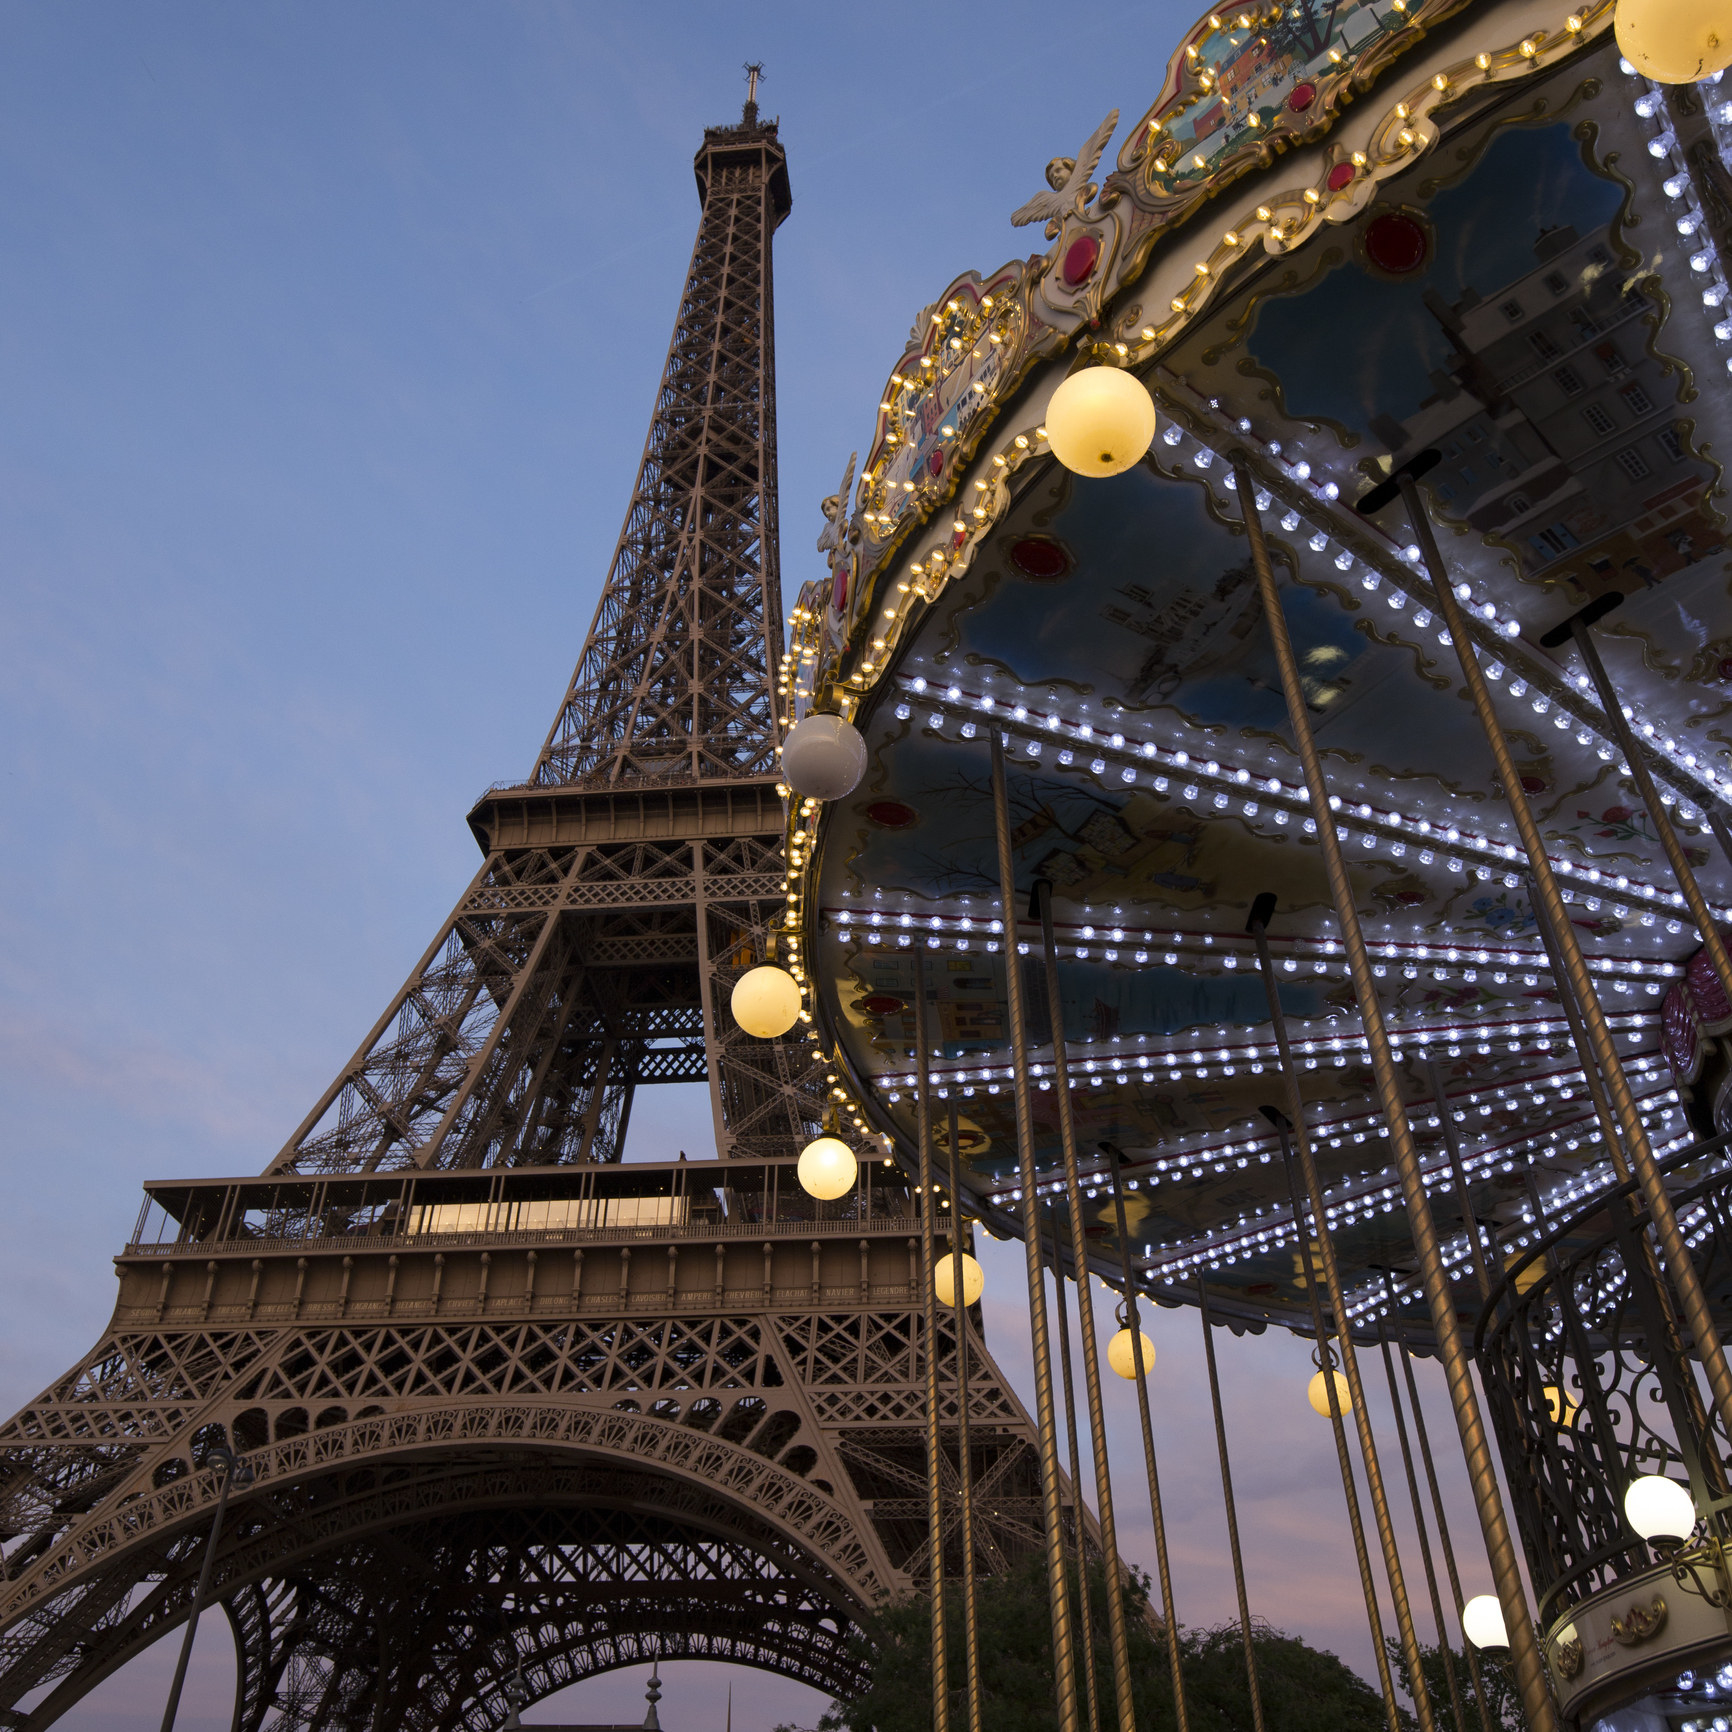 Eiffel Tower and carousel in Paris at dusk